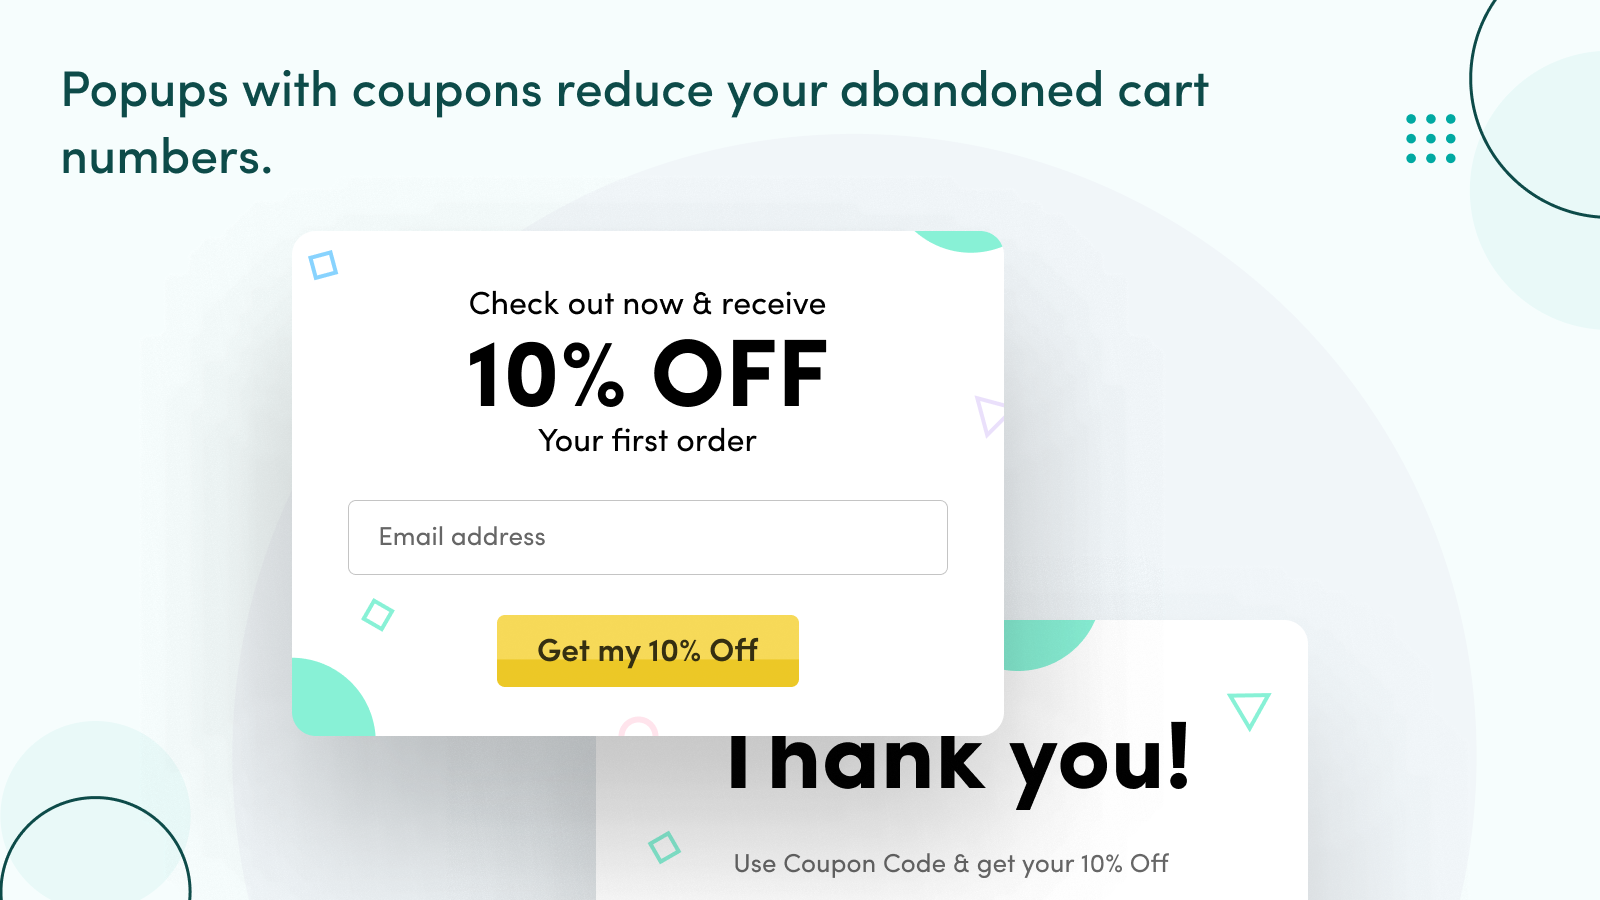 Popups w/ Coupons reduce your ACR.